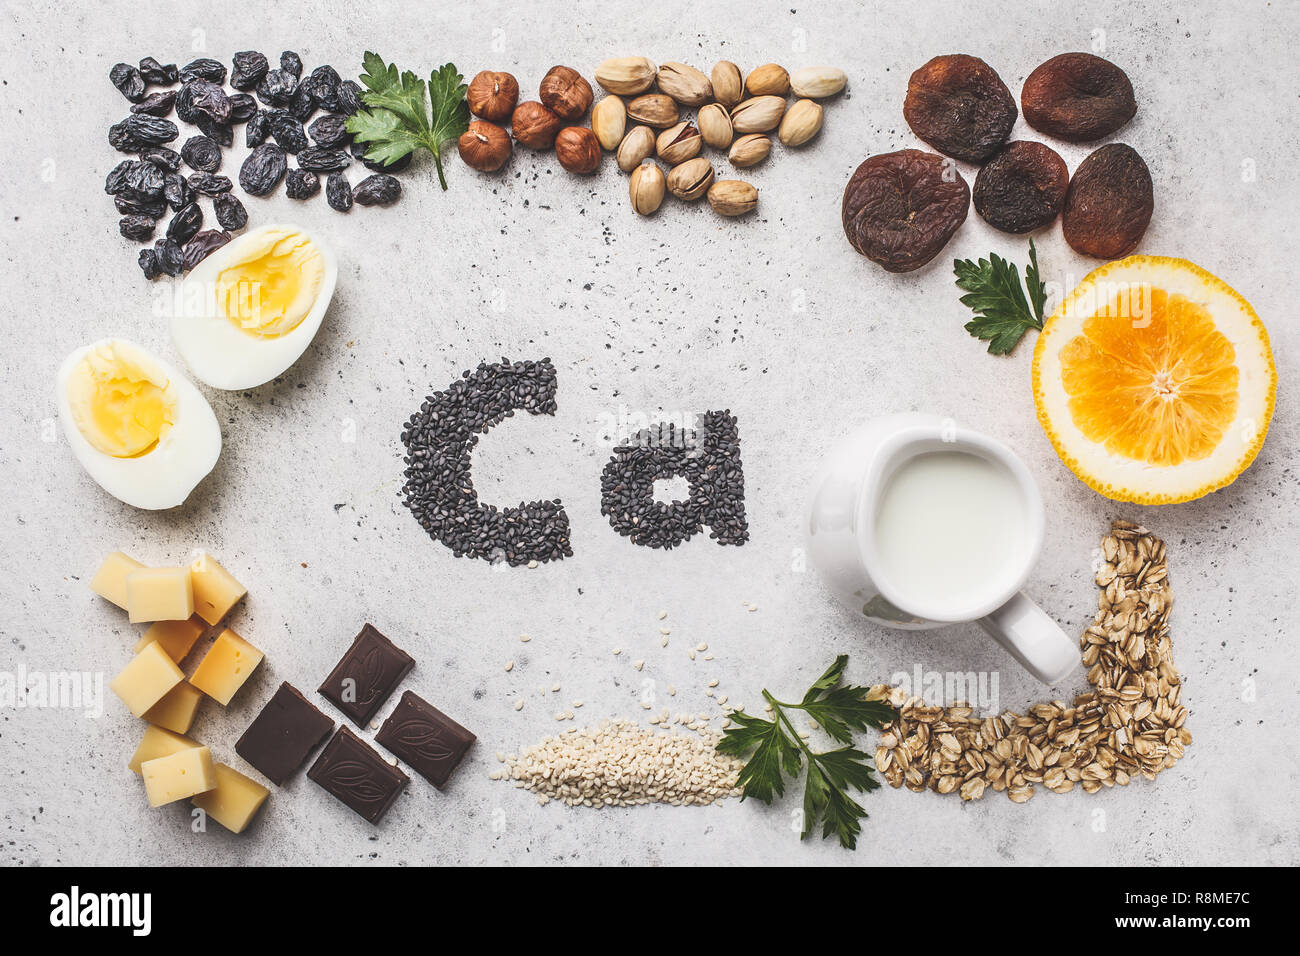 Healthy products sources of calcium. Top view, food background, Ca ingredients: cereals, dried fruits, dairy products, orange, nuts, greens and cheese Stock Photo